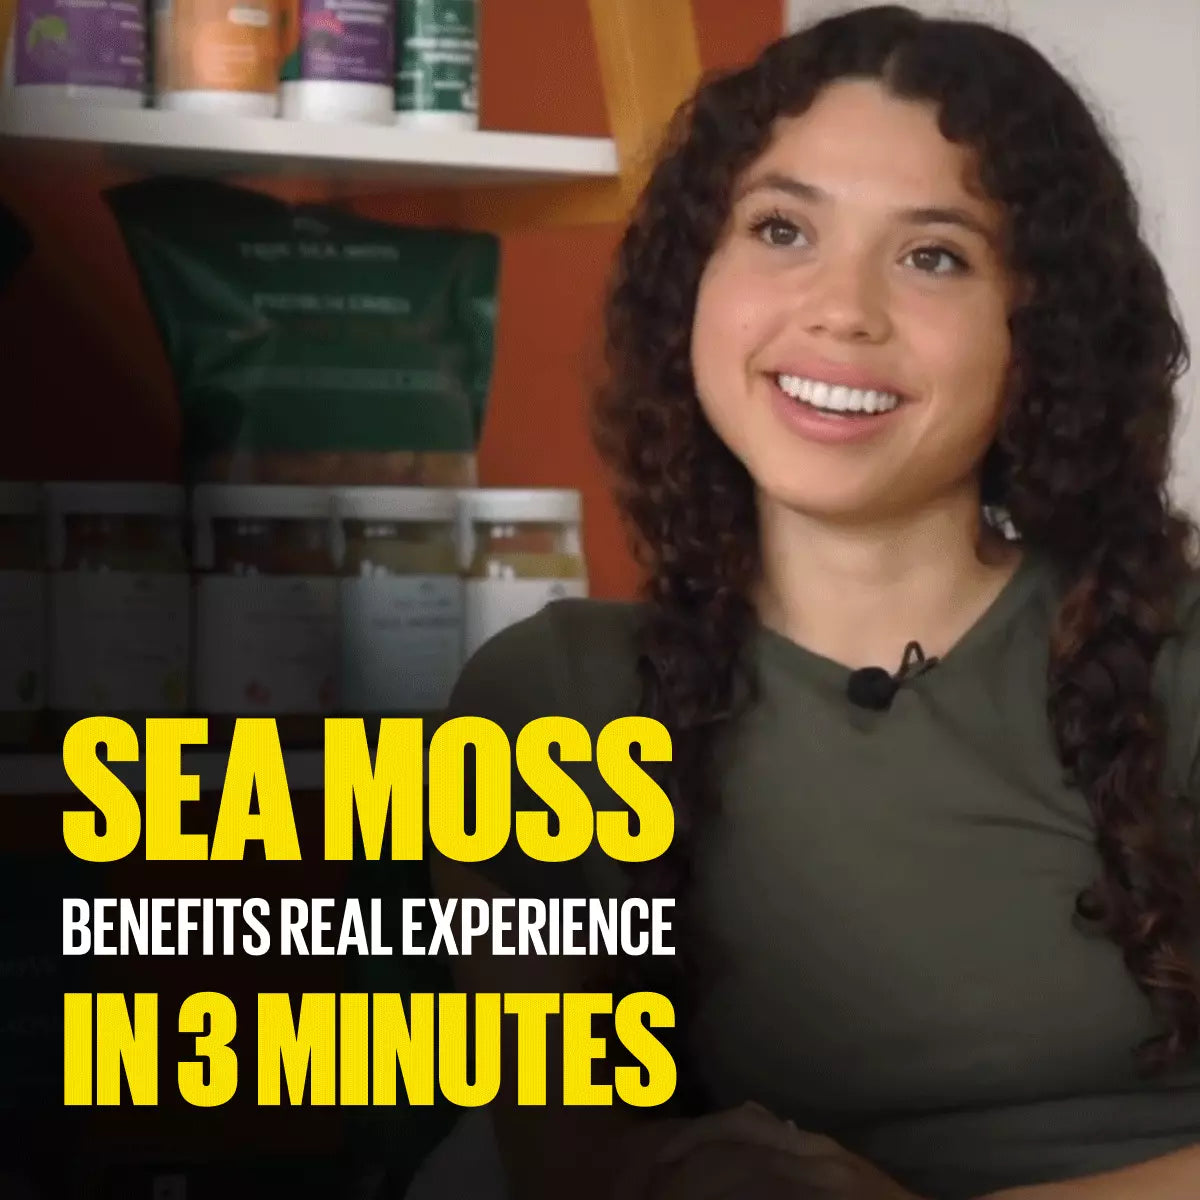 What our real customers tell about sea moss eating